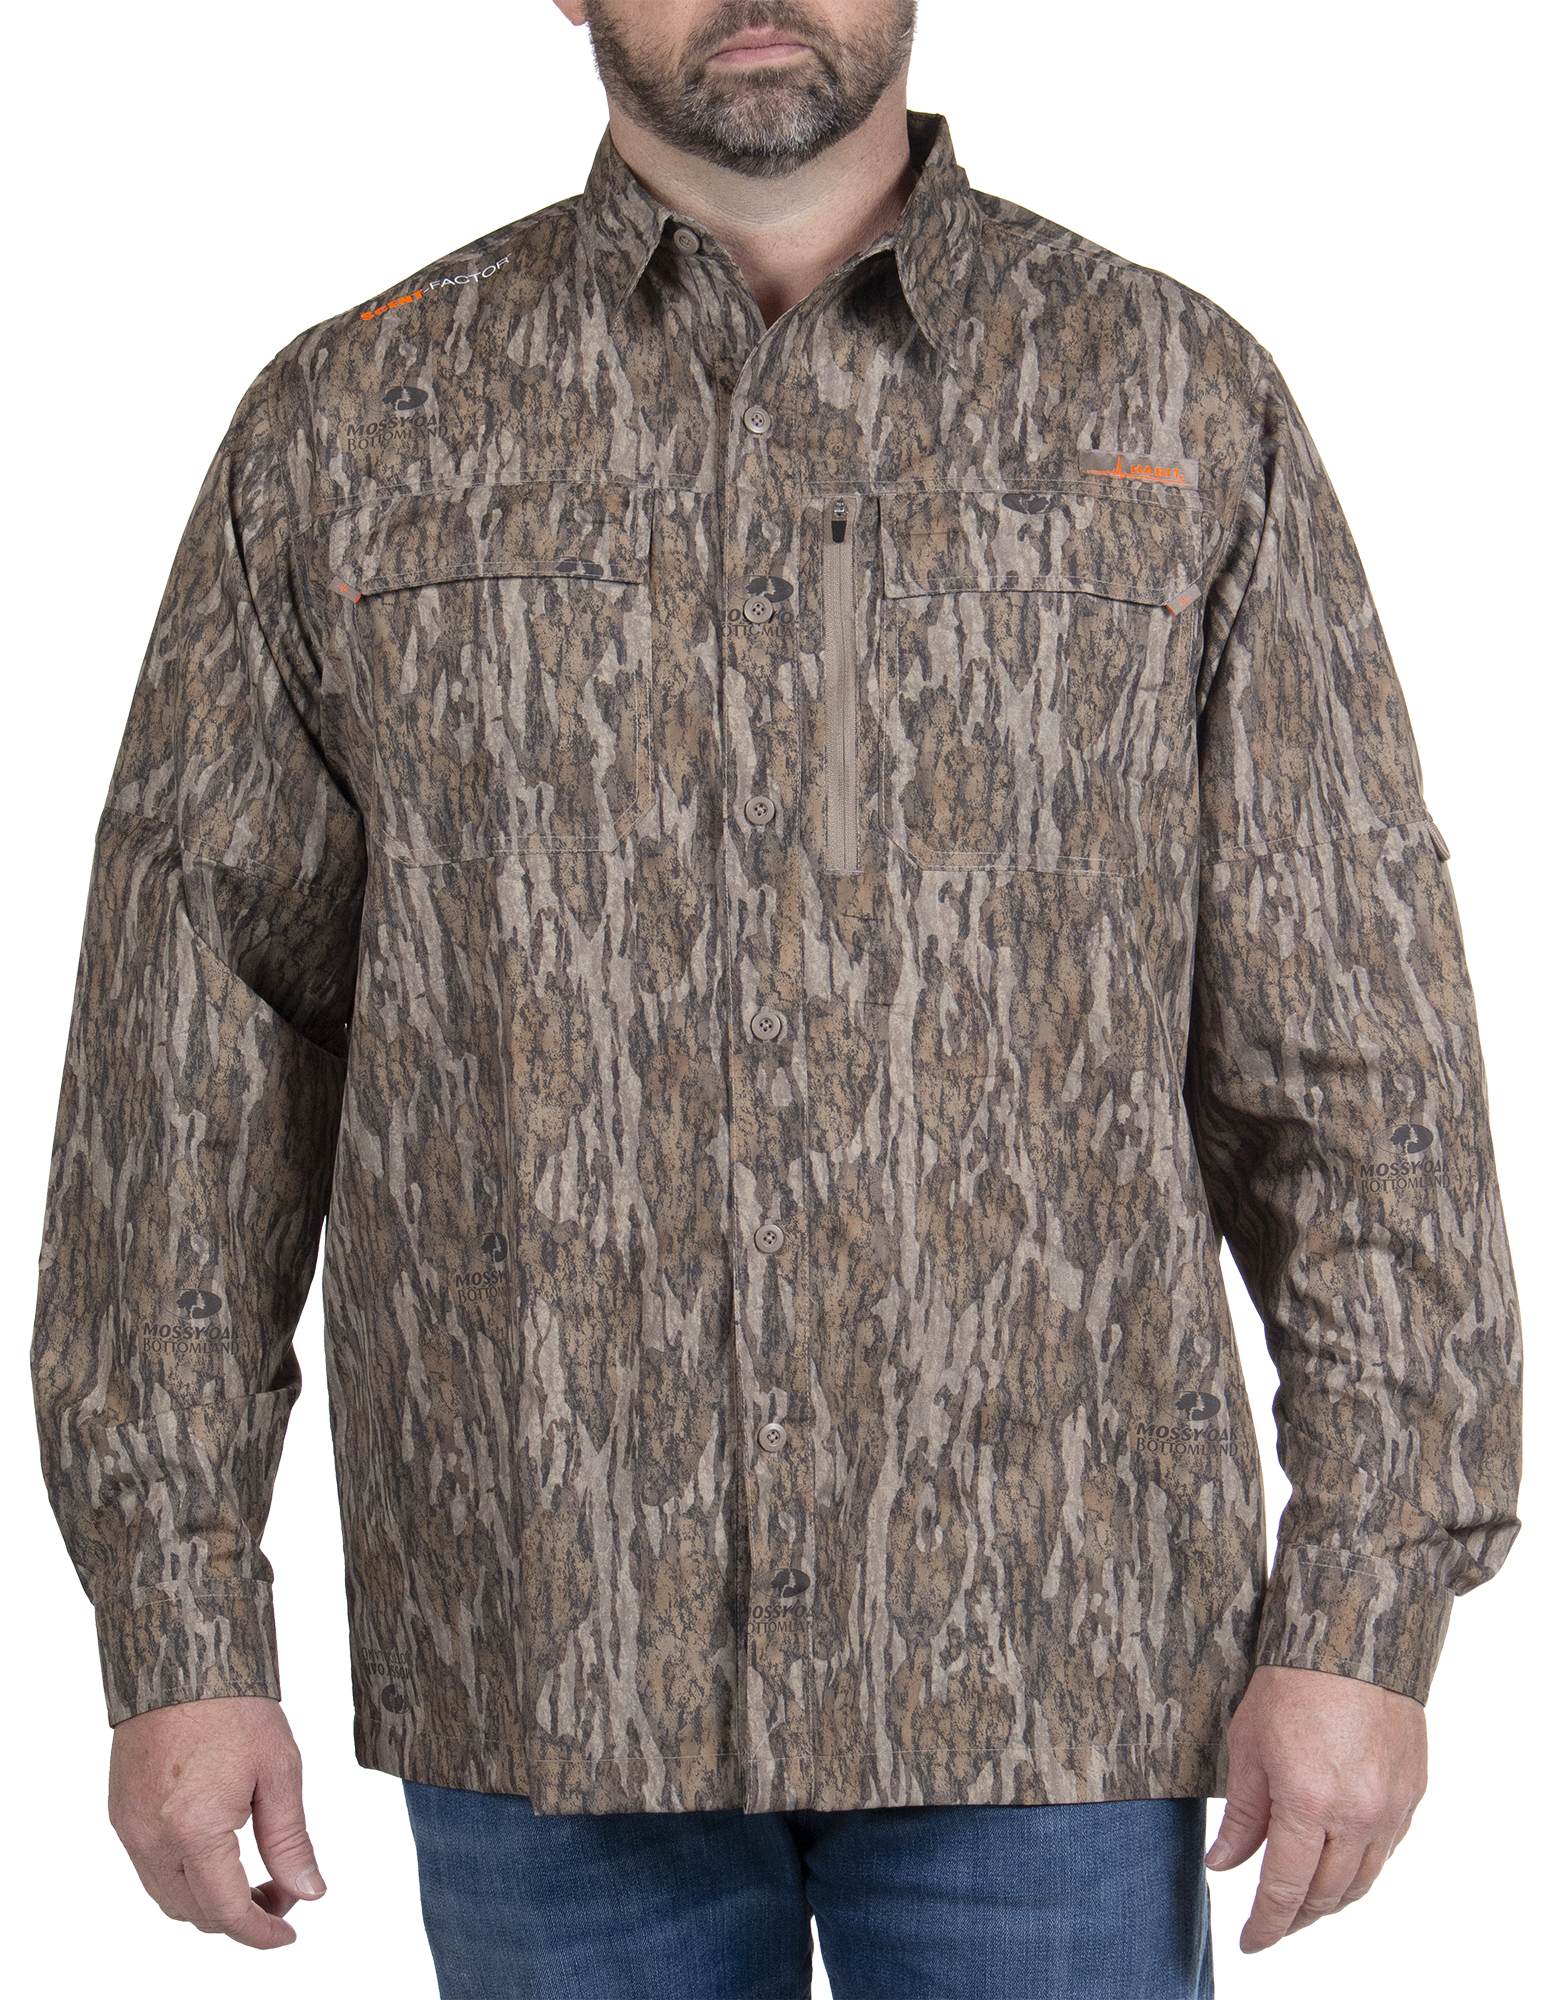 Mossy Oak Mens Fishing Shirts for Men Long Sleeve with 40+ UPF Sun Protection